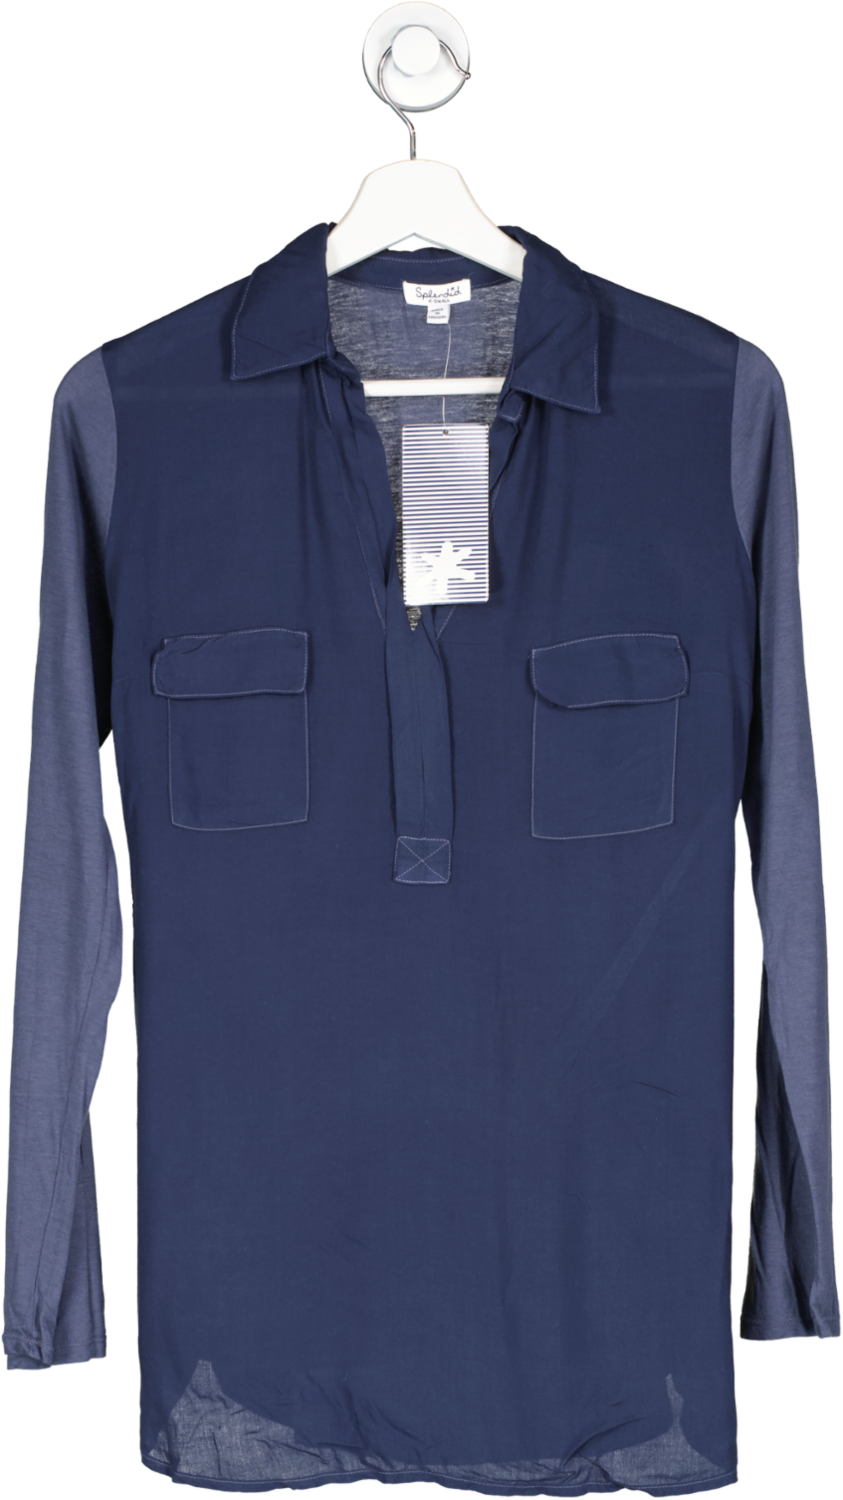 Splendid Blue Shirt With Contrast Sleeves And Stitching BNWT UK XS